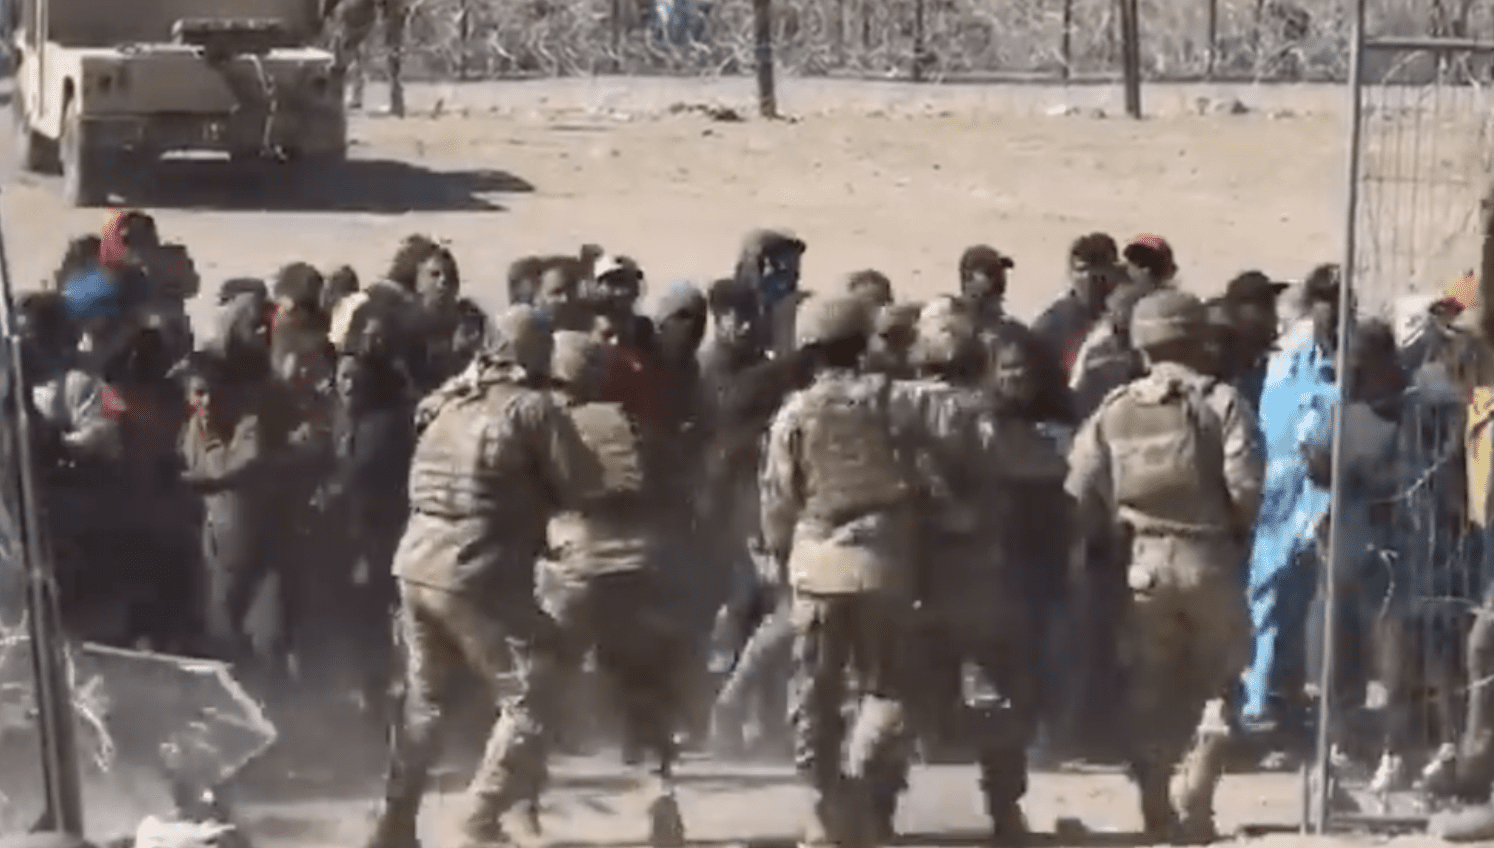 Leftwing Judge Releases Violent Illegals Who Stampeded Border, Attacked National Guard - Geller Report